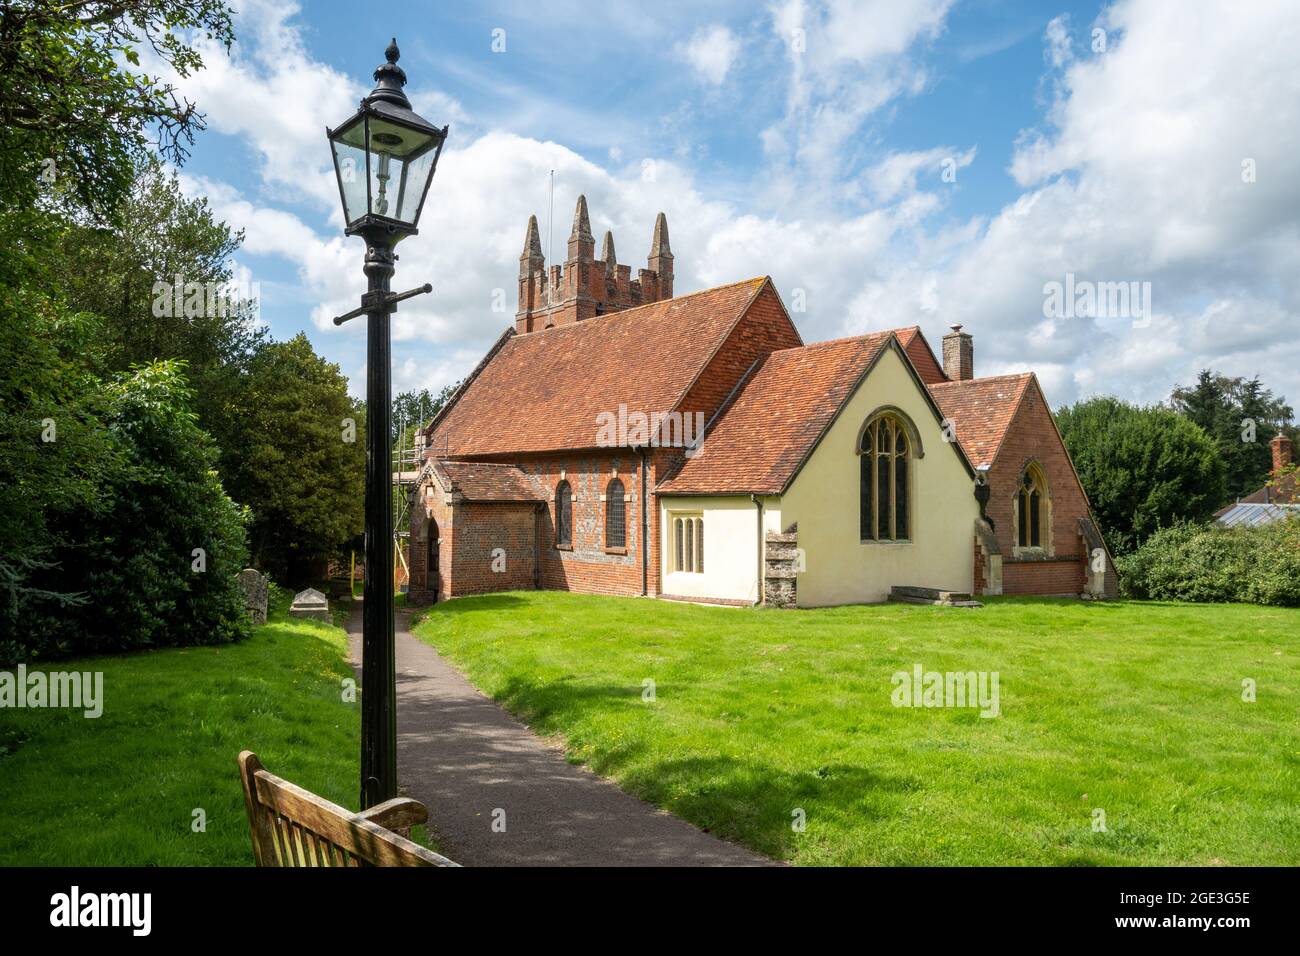 St Mary's Church in Eversley, a Hampshire village, England, UK Stock Photo